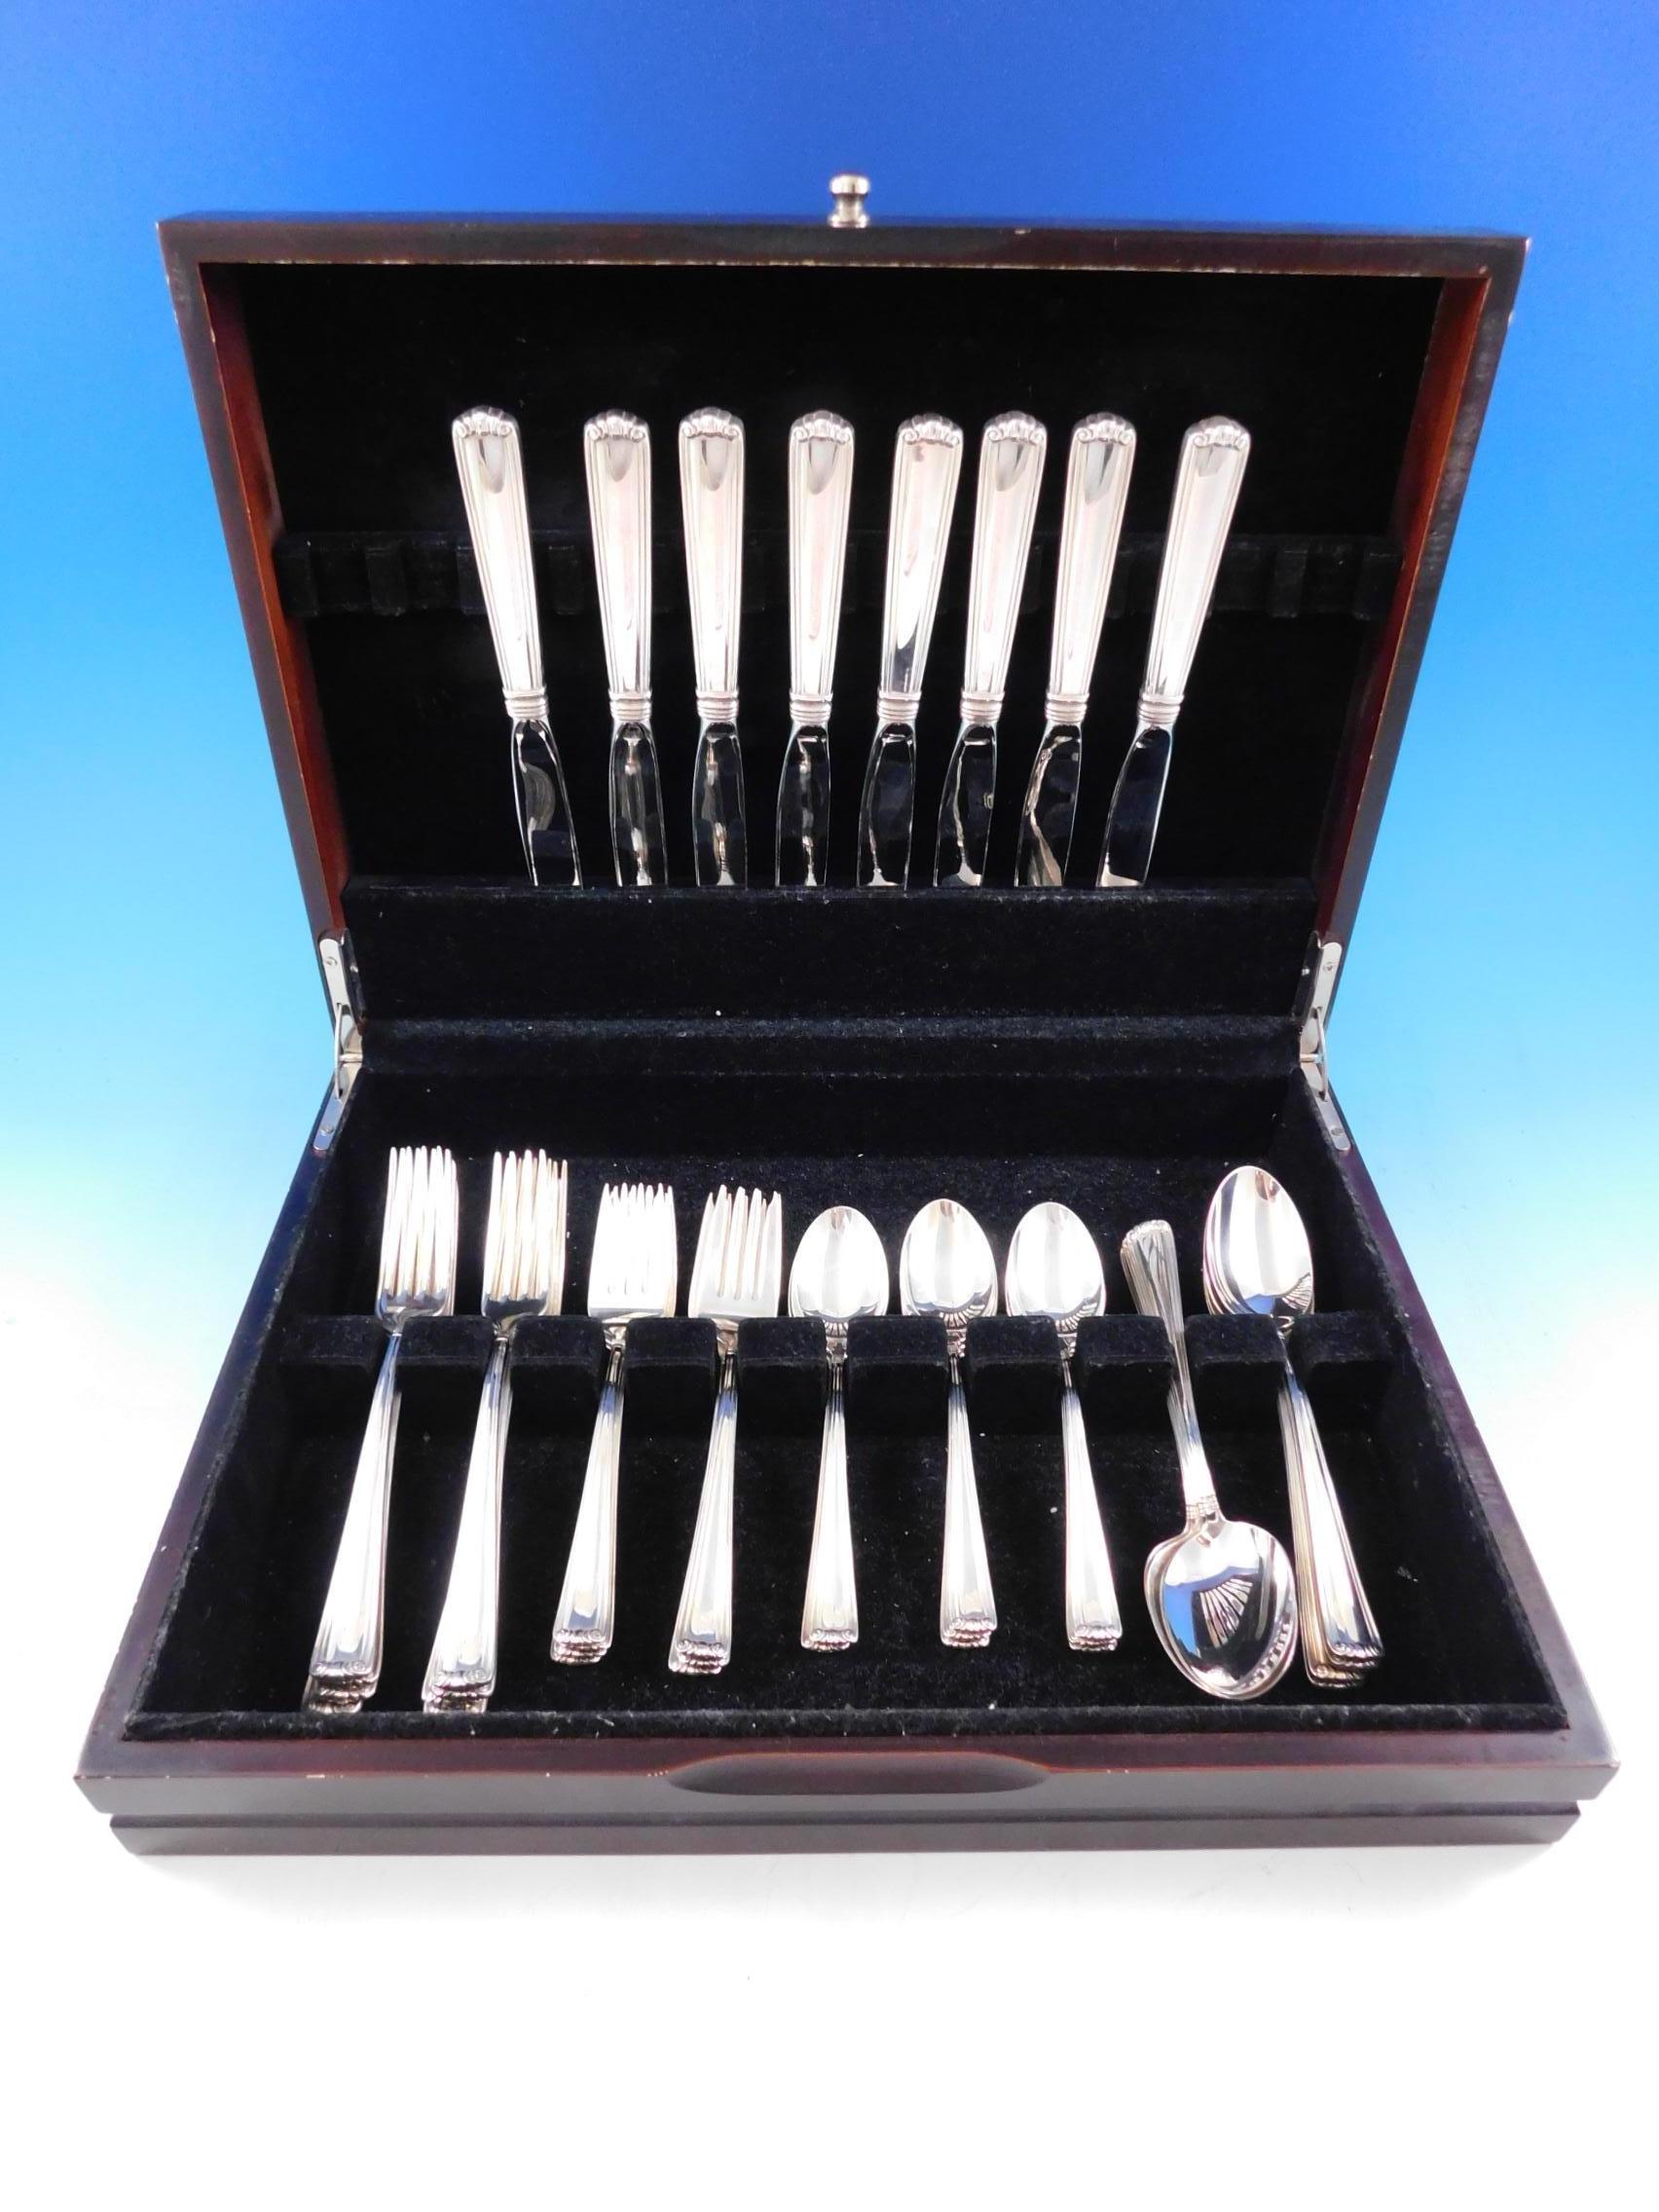 Embassy Scroll by Lunt sterling silver flatware set, 40 pieces. This set includes:

8 knives, 8 3/4